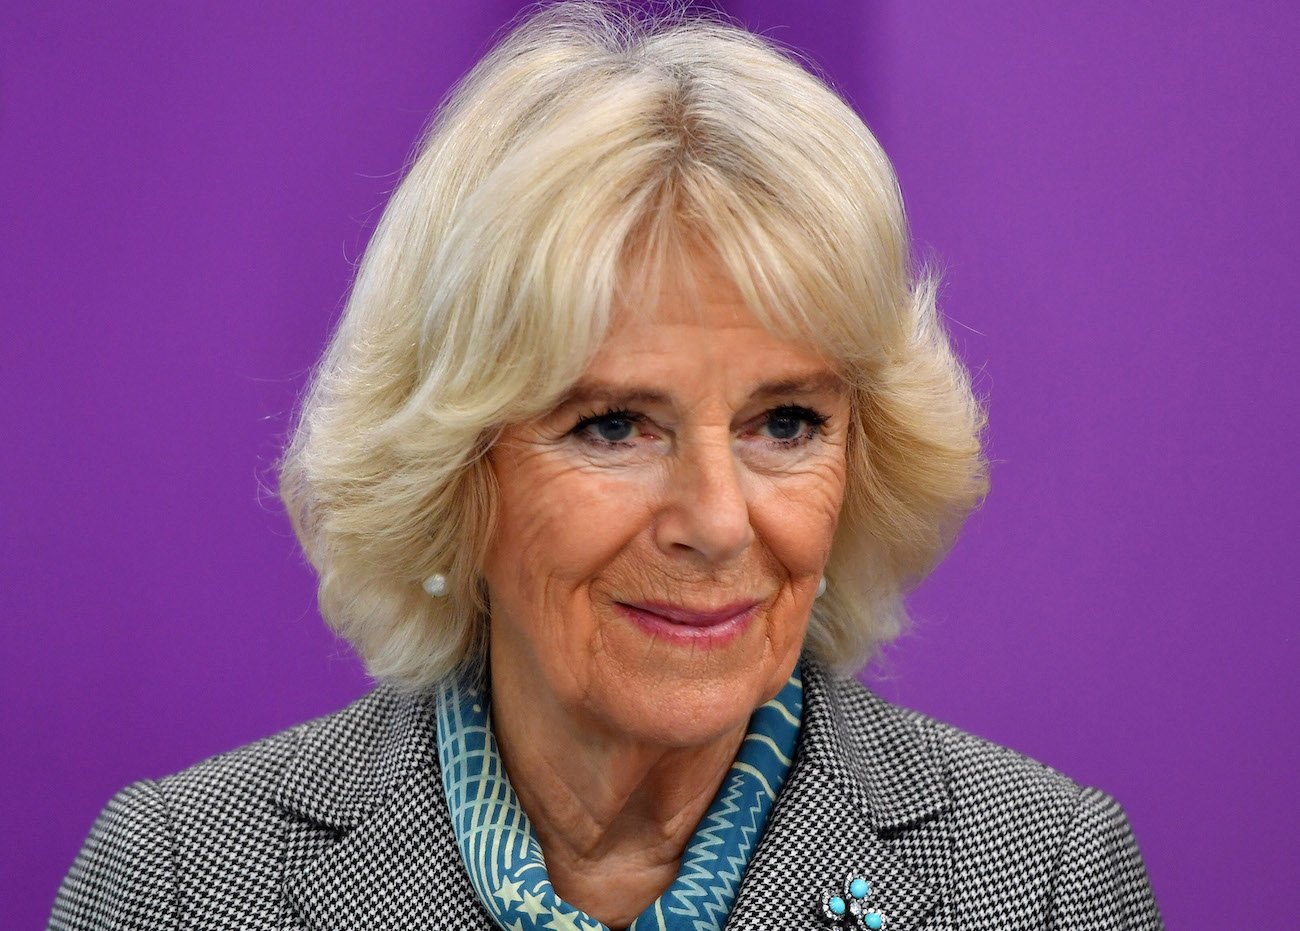 Camilla Parker Bowles looking on in front of purple background